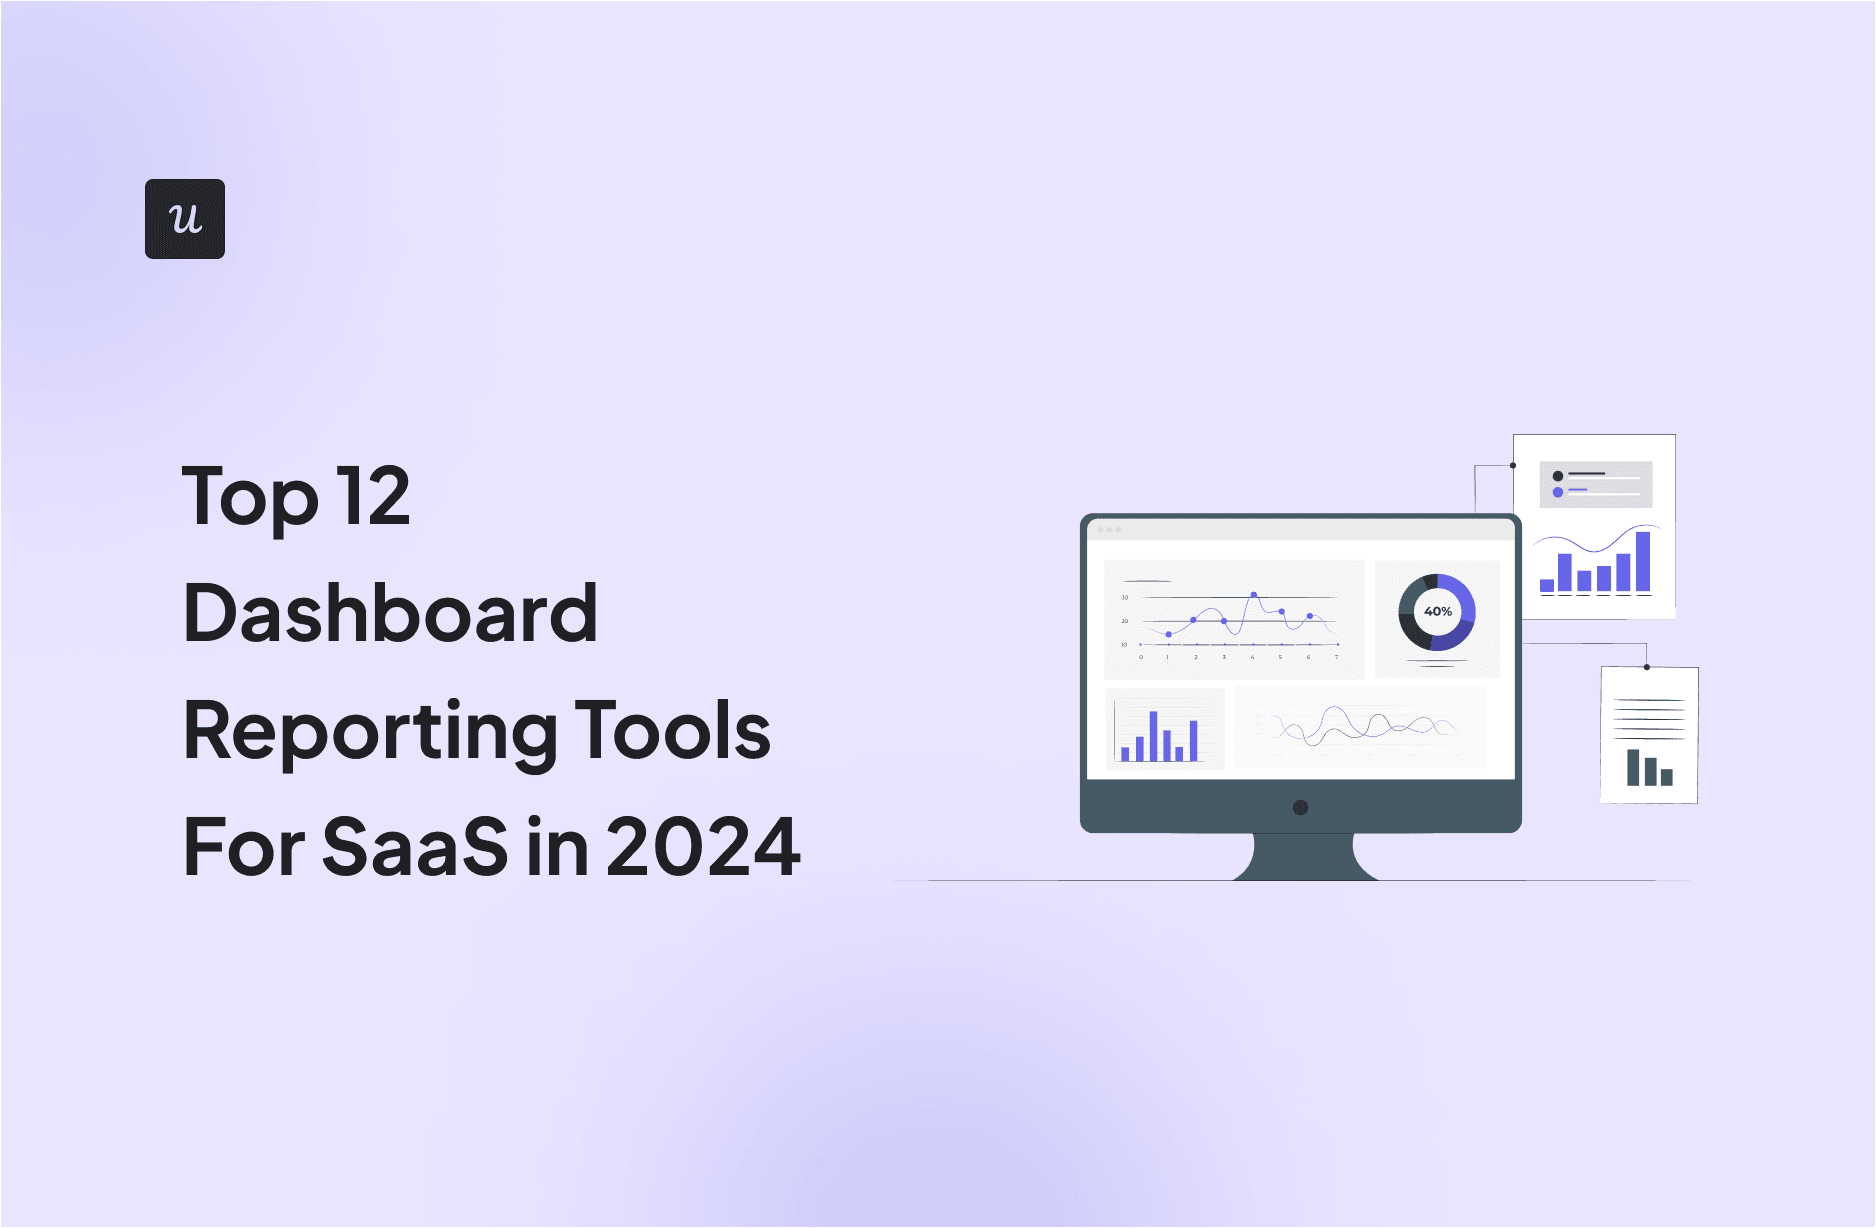 Top 12 Dashboard Reporting Tools For SaaS in 2024 cover